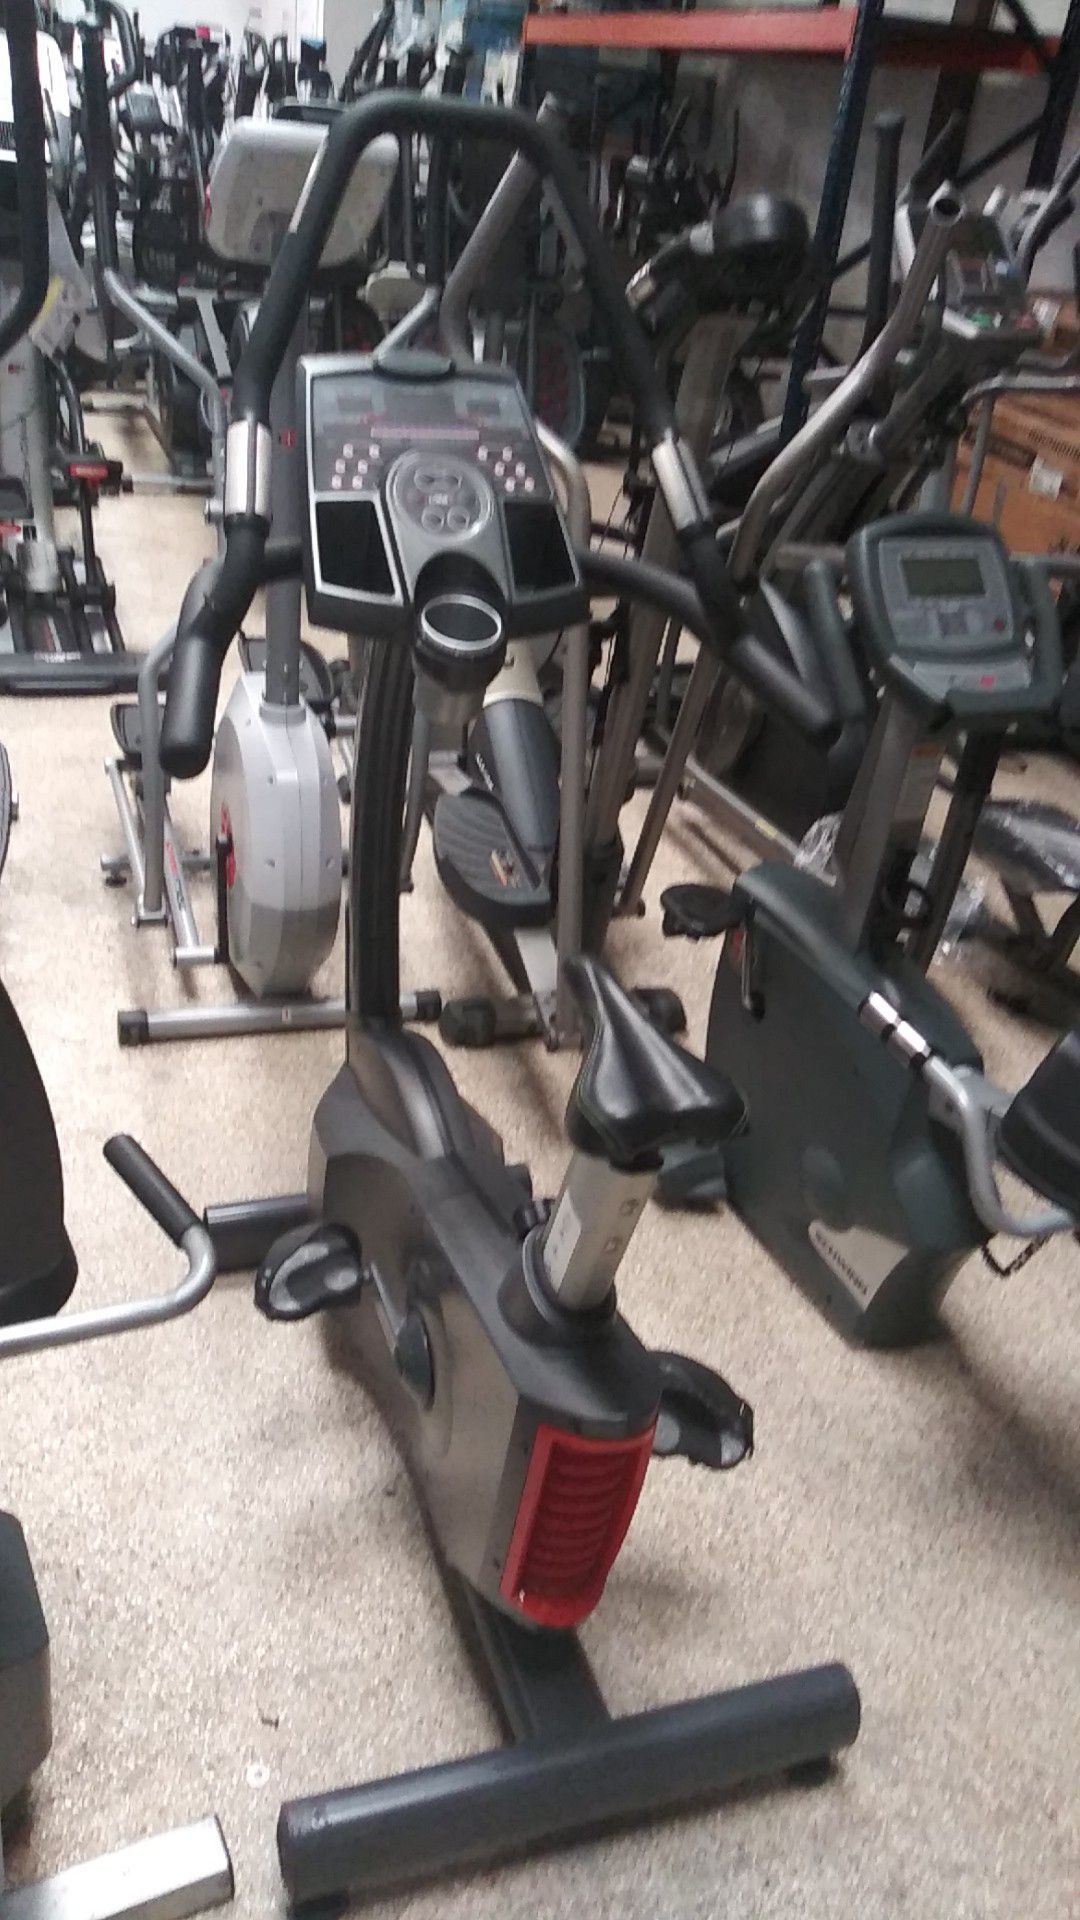 Commercial heavy duty exercise upright bike